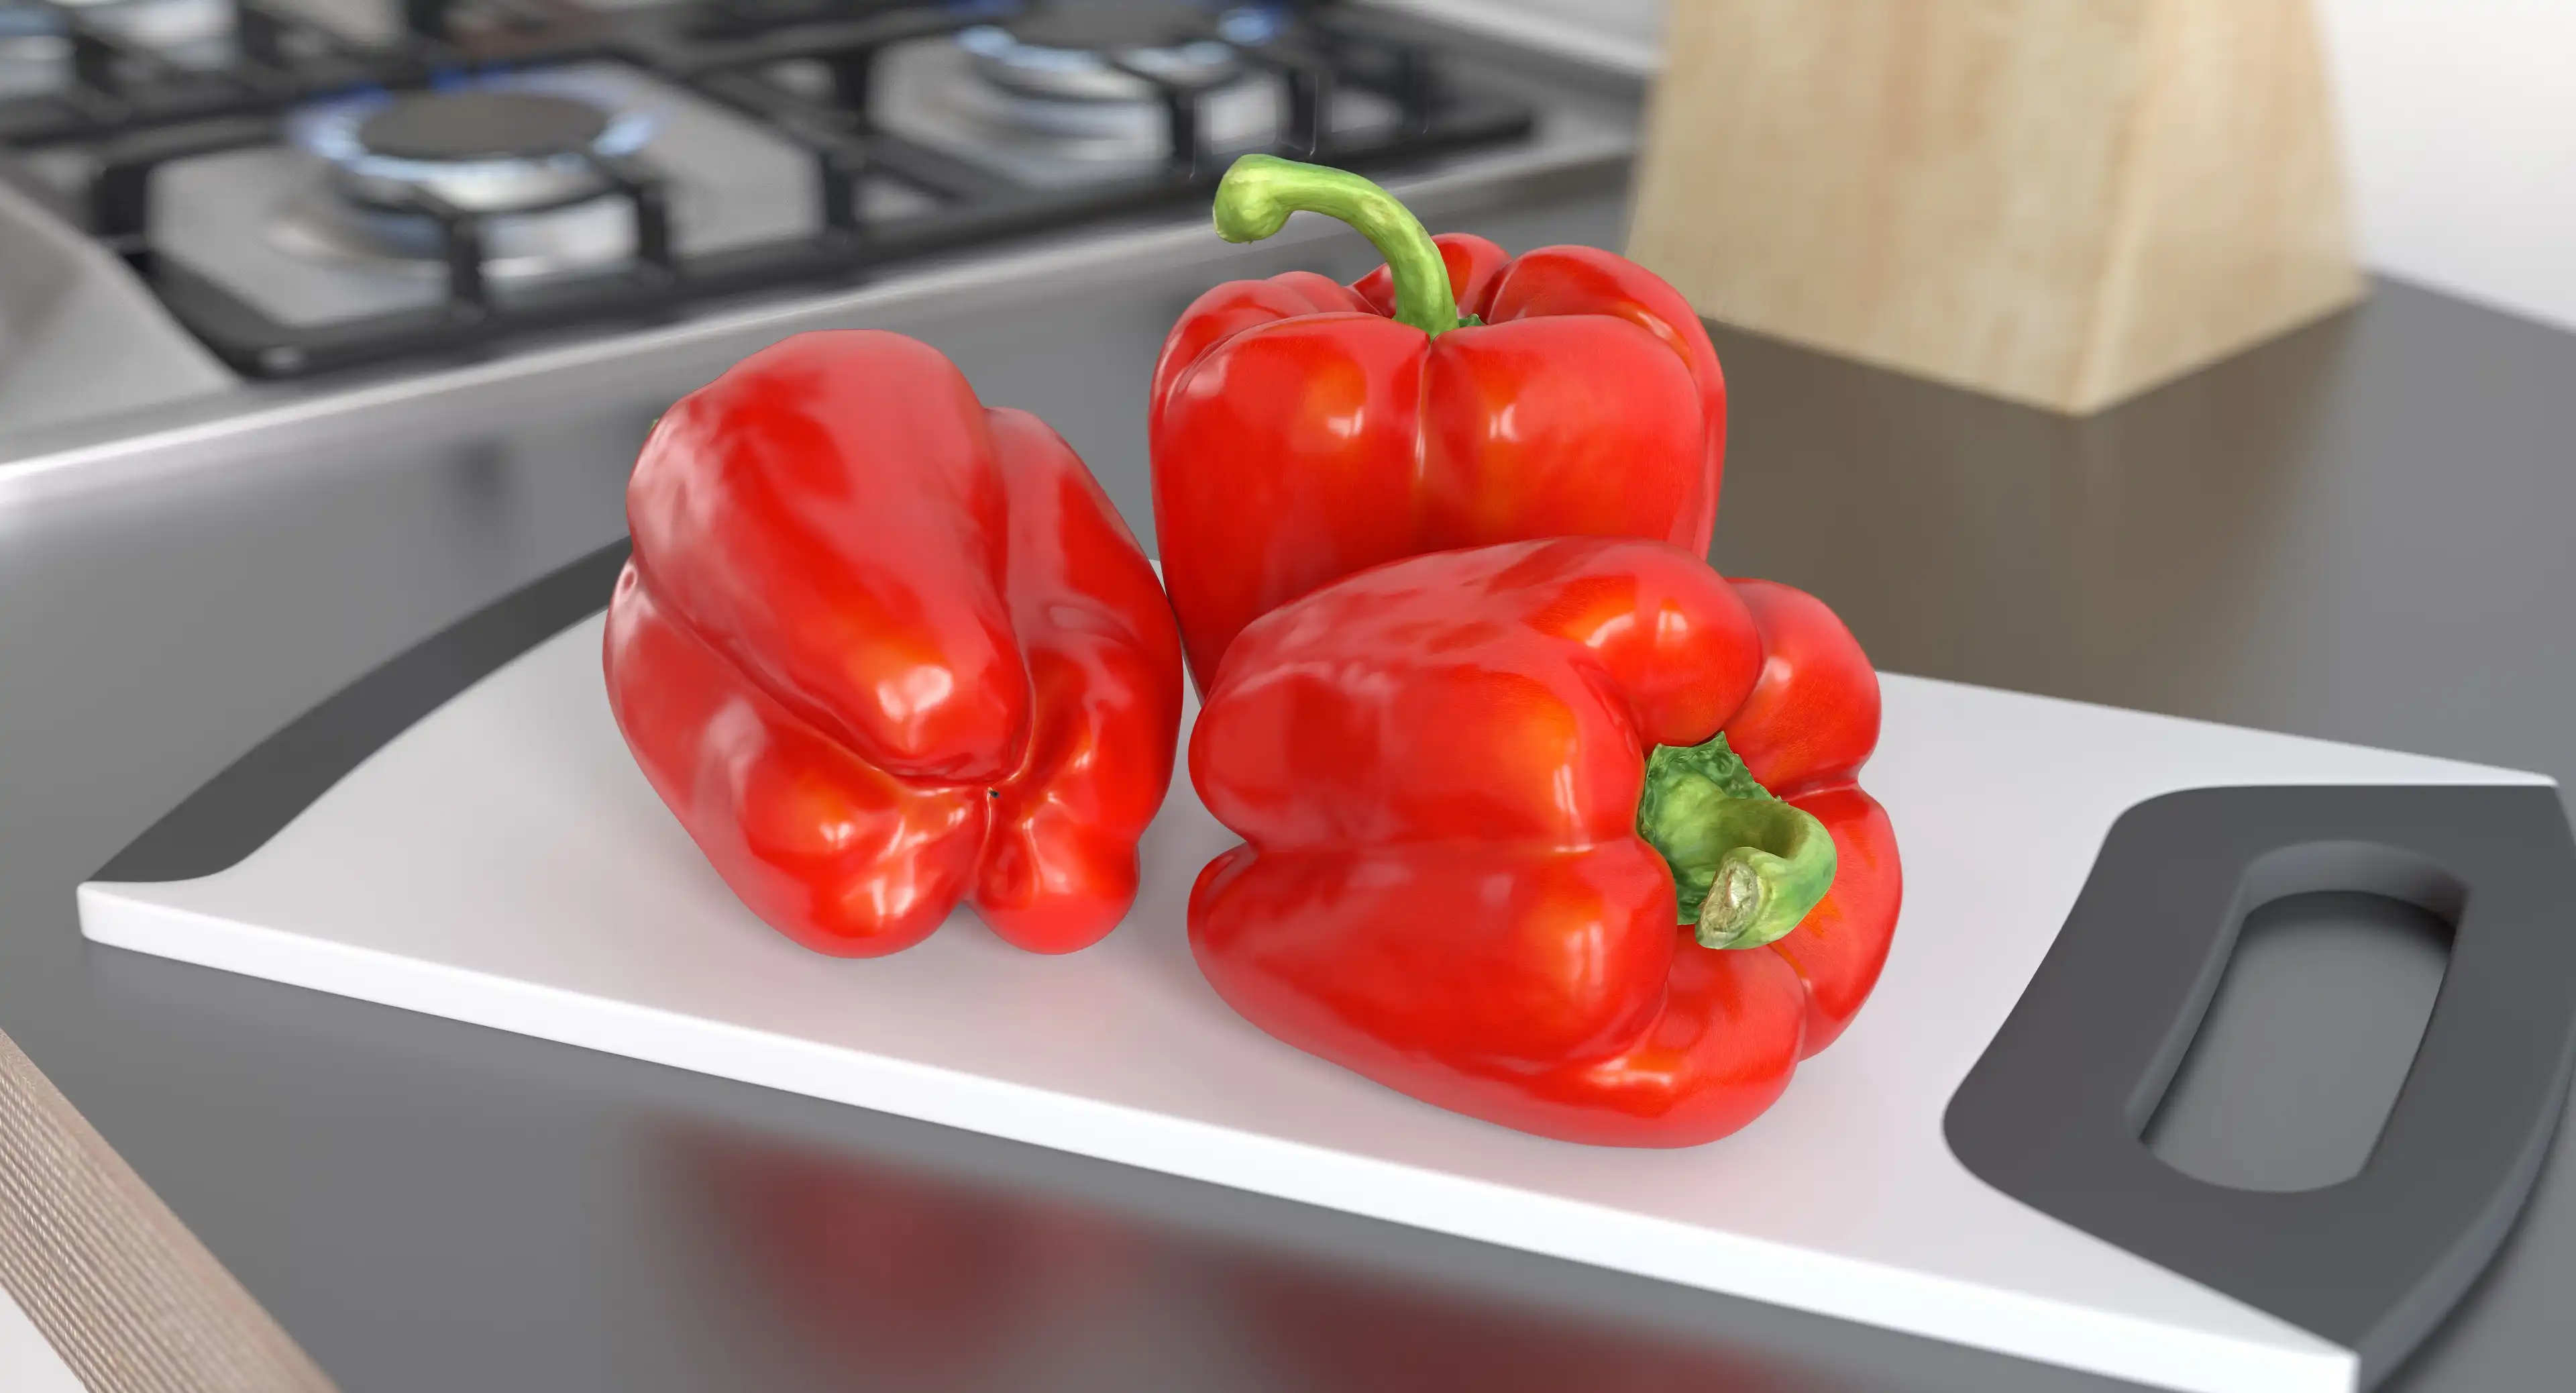 3D rendering of three red bell peppers lying on a cutting board in the kitchen. It is an example of using Red Bell Pepper 3D Model in archtectural scene.